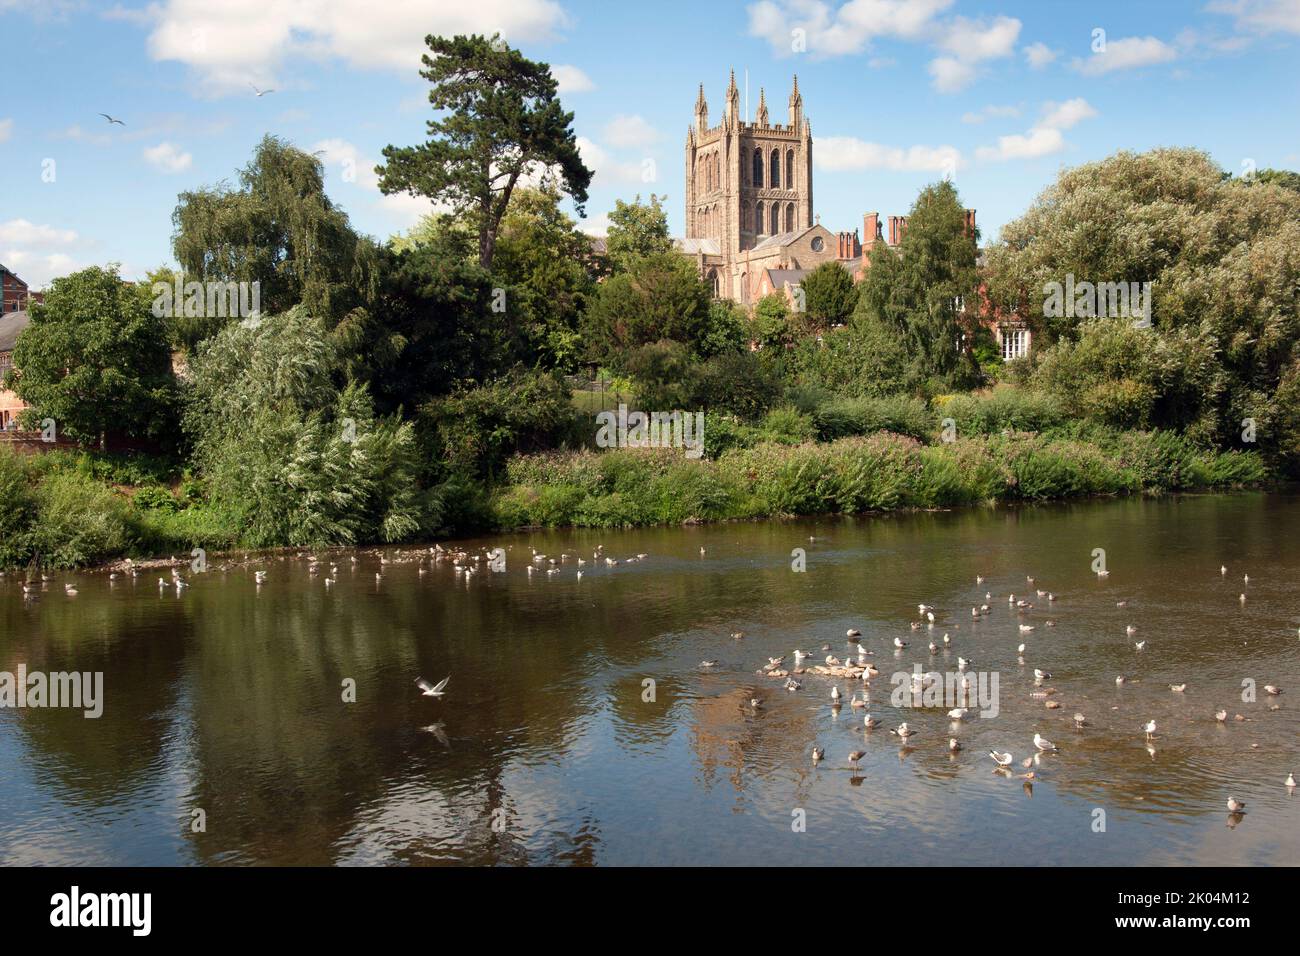 River Wye and Hereford cathedral, Herefordshire, England Stock Photo